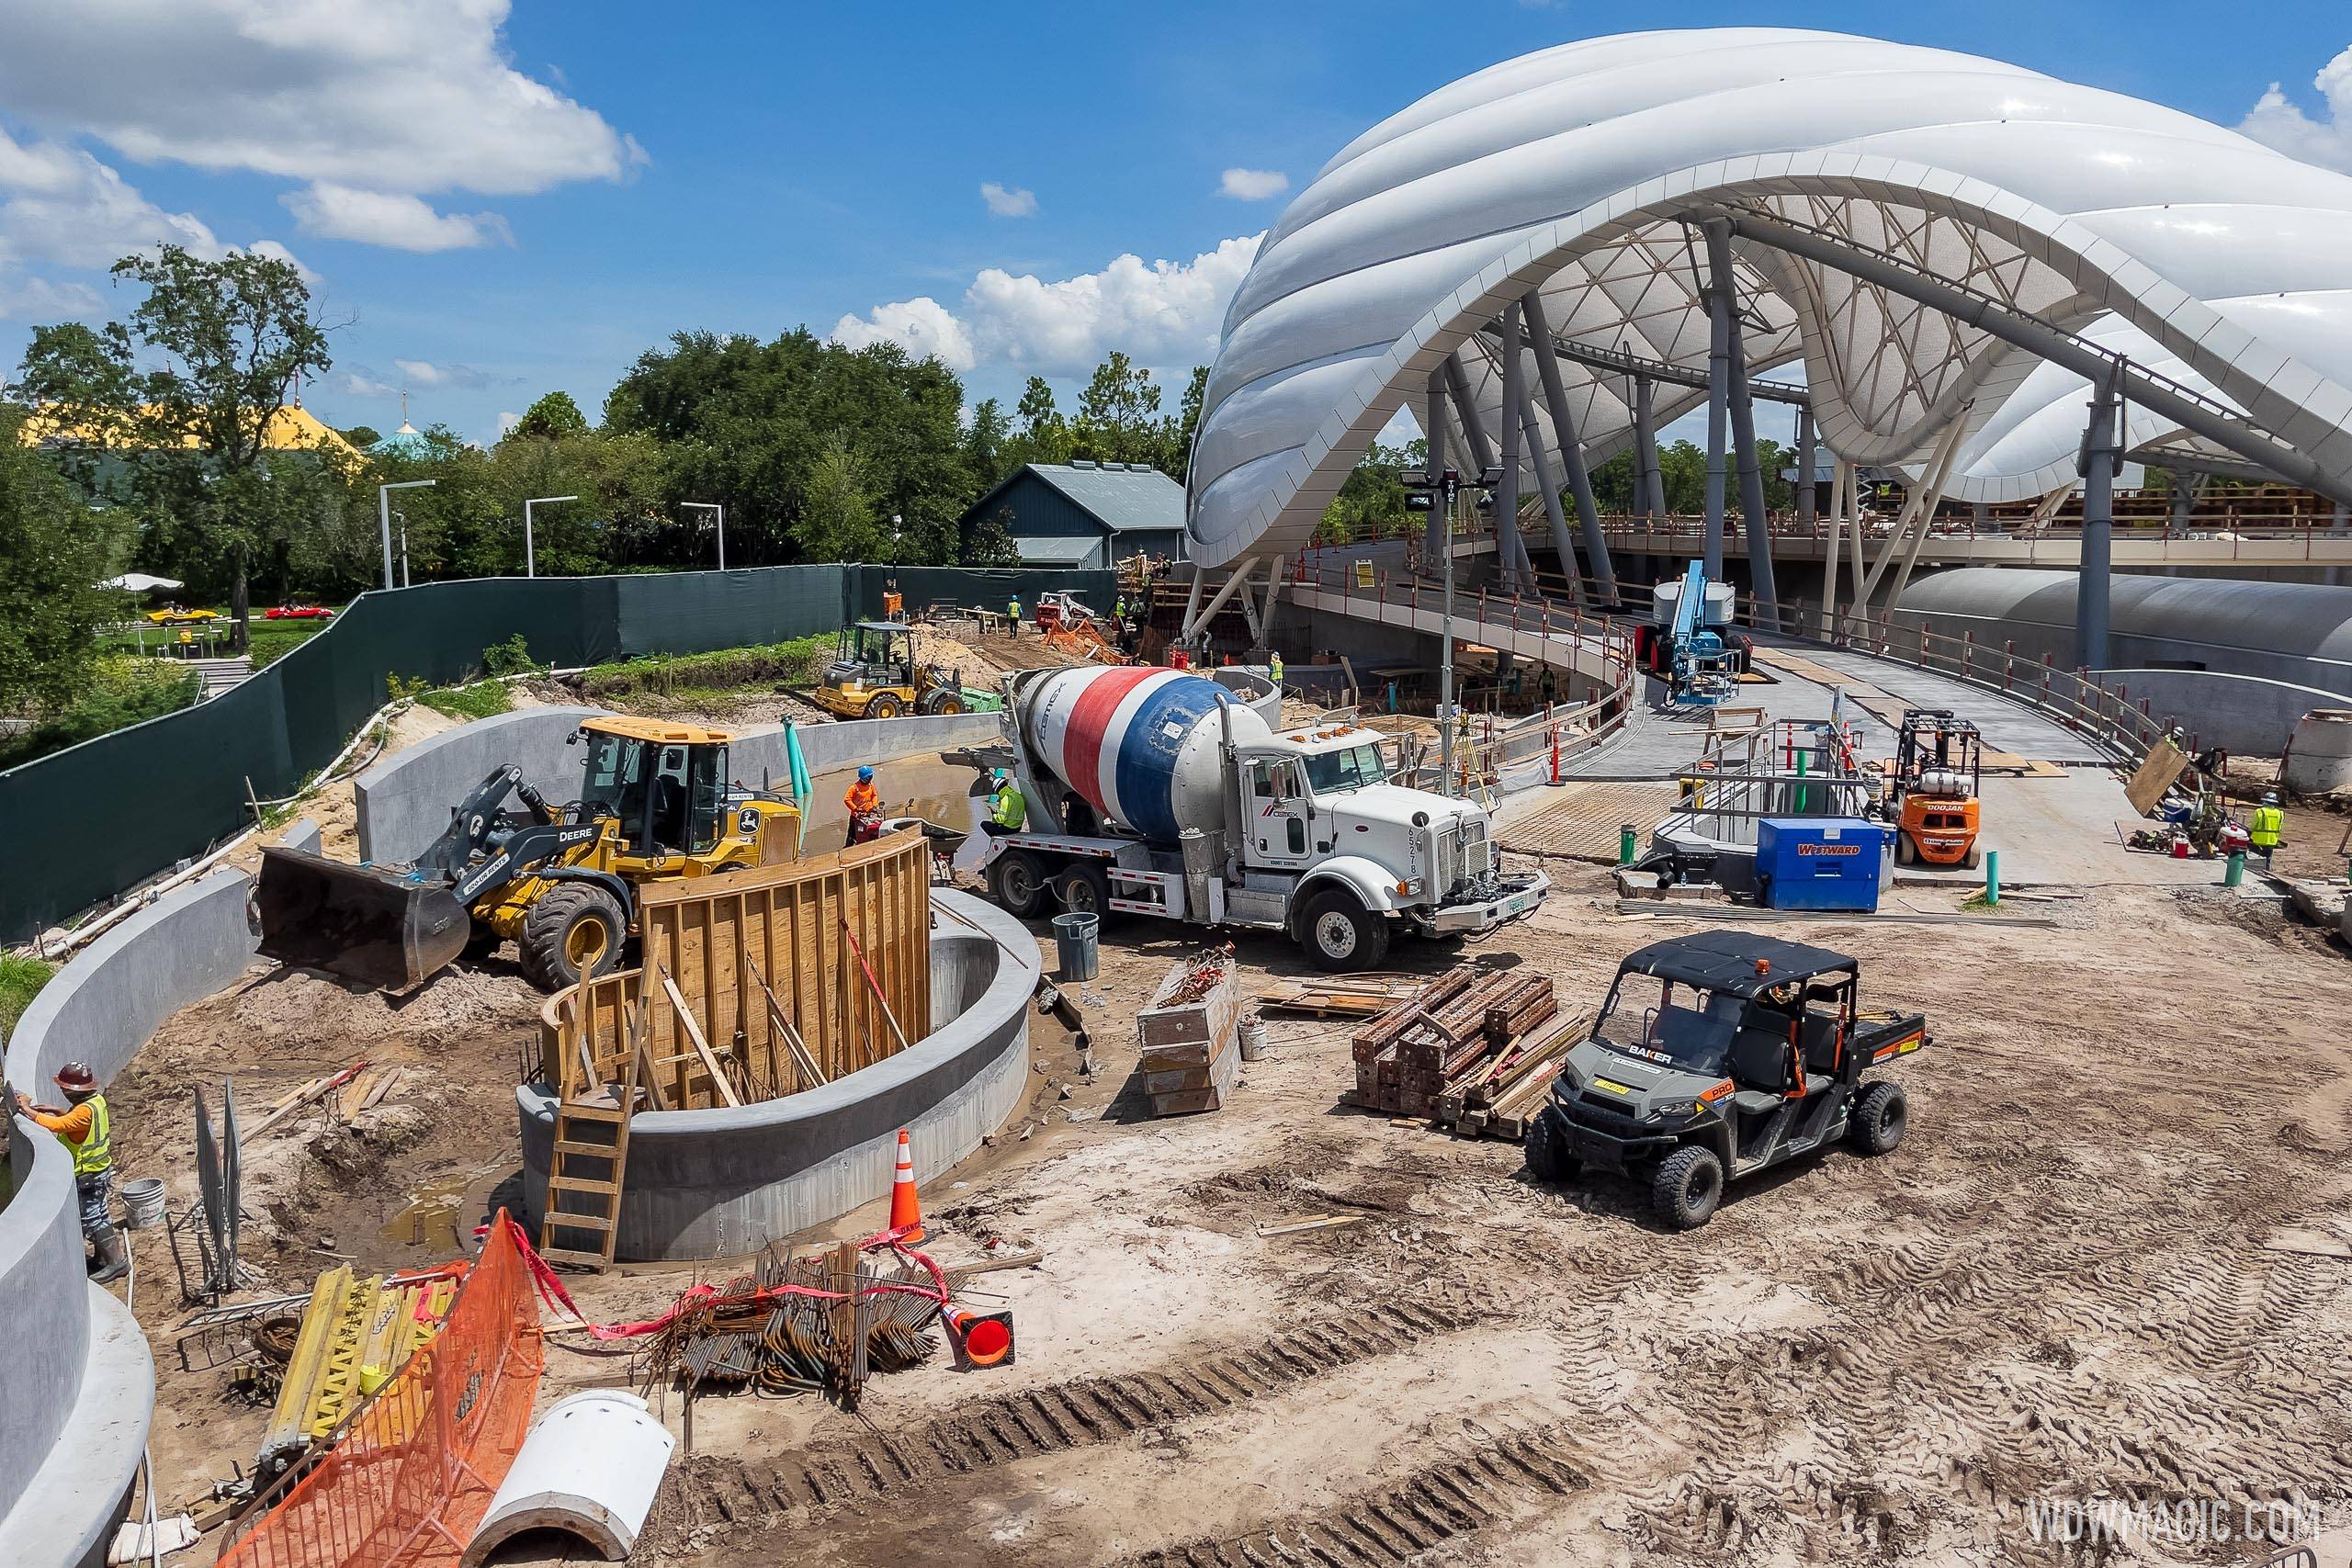 TRON Lightcycle Run construction update from Magic Kingdom